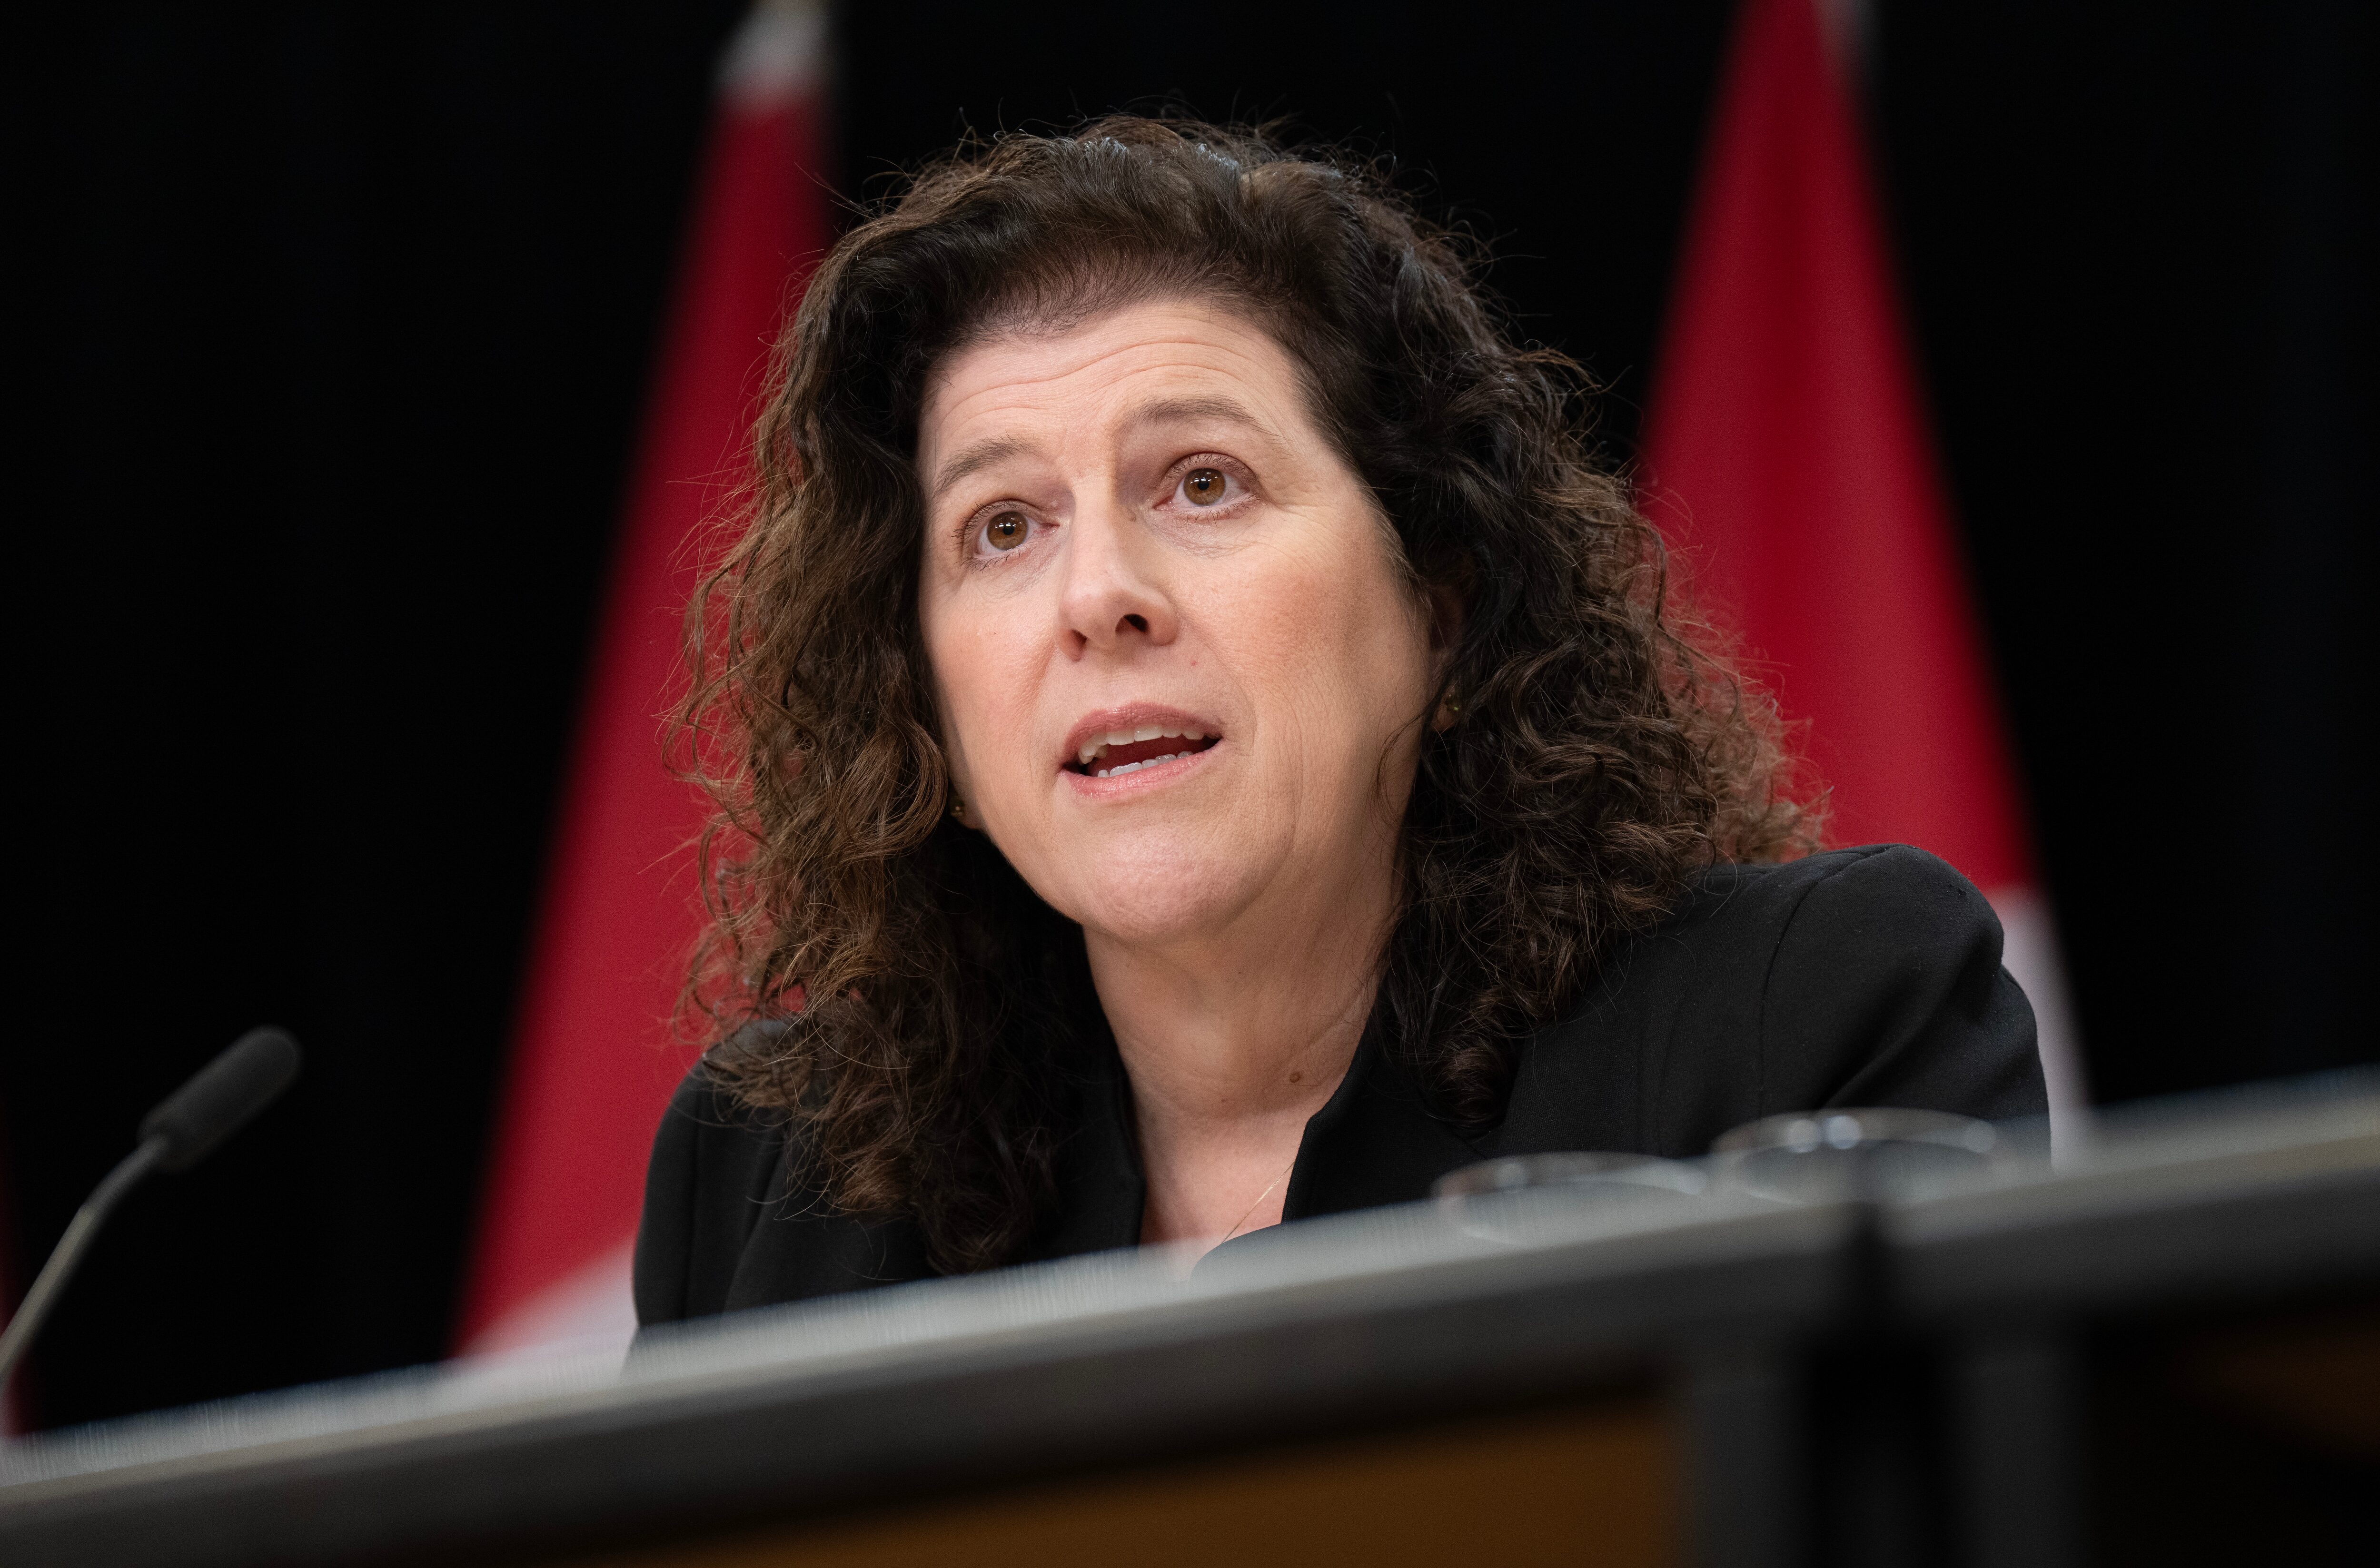 RCMP studying ArriveCan report after meeting with top auditor